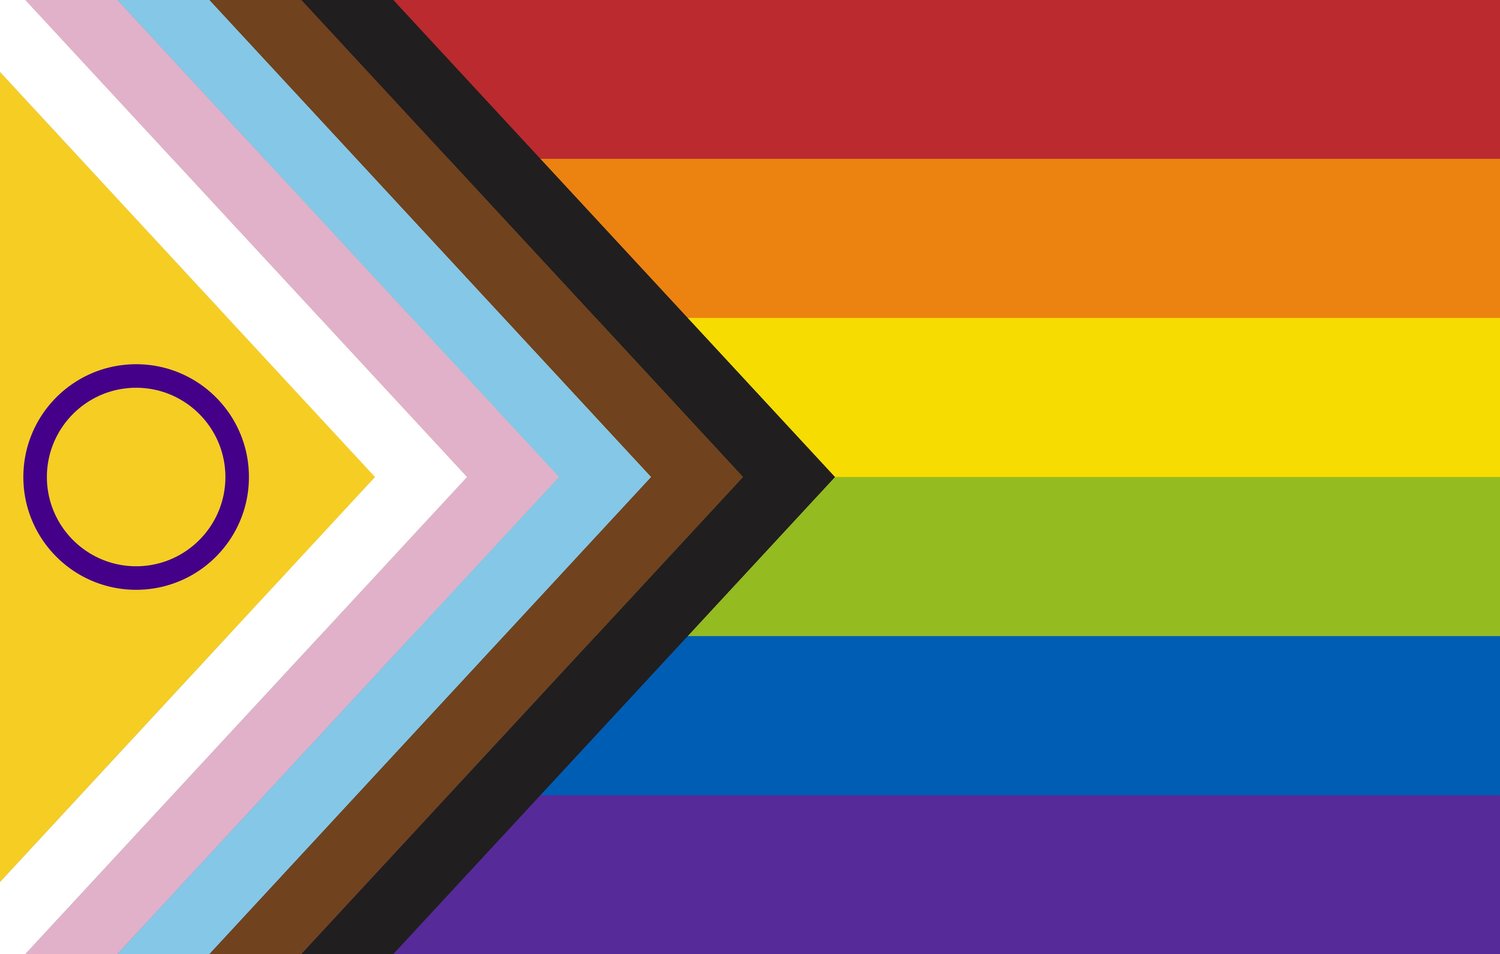 The Home of the Global Inclusive Pride Flag